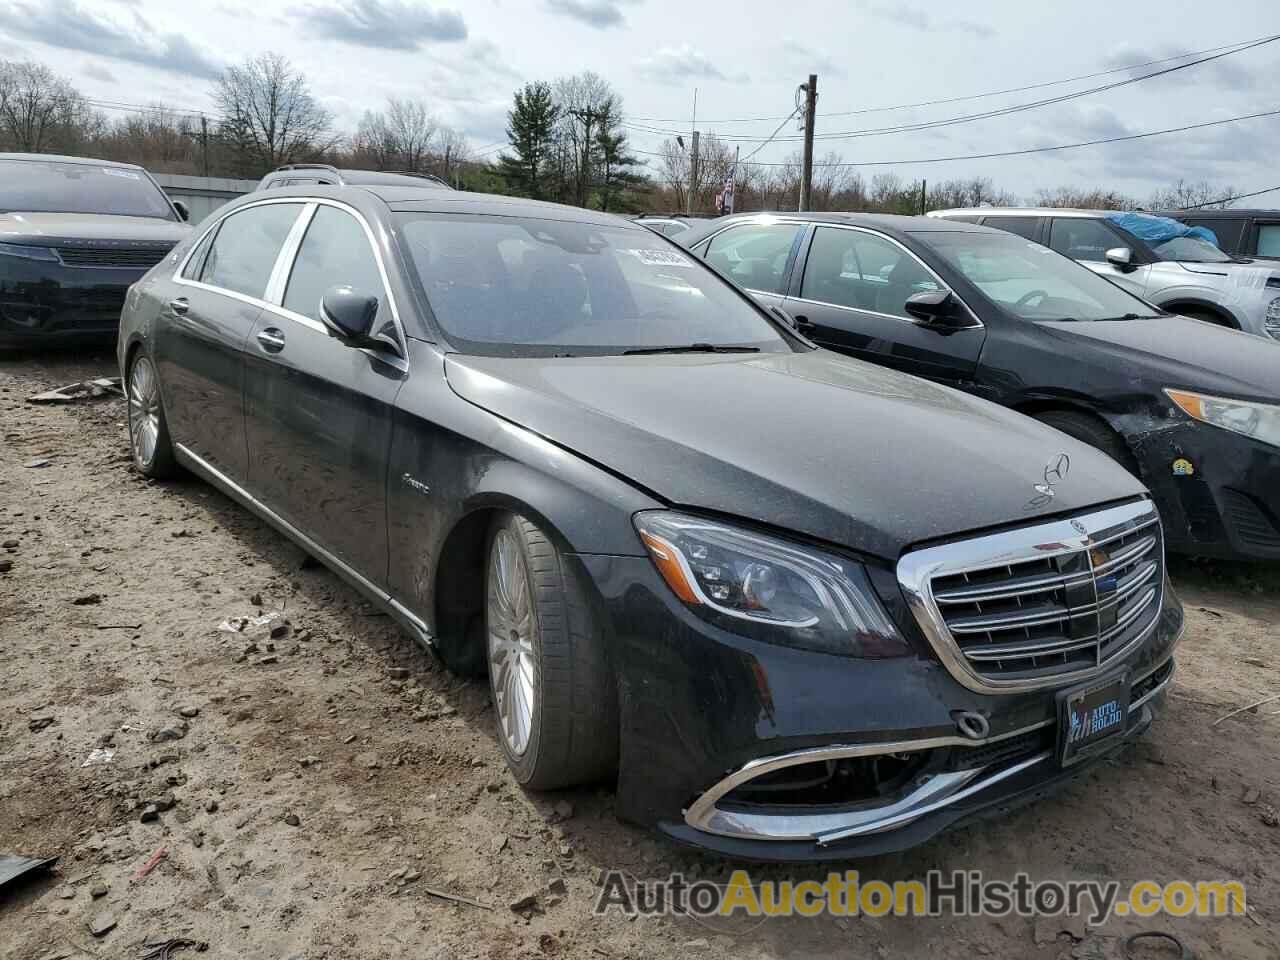 MERCEDES-BENZ ALL OTHER MERCEDES-MAYBACH S560 4MATIC, WDDUX8GB1JA359684